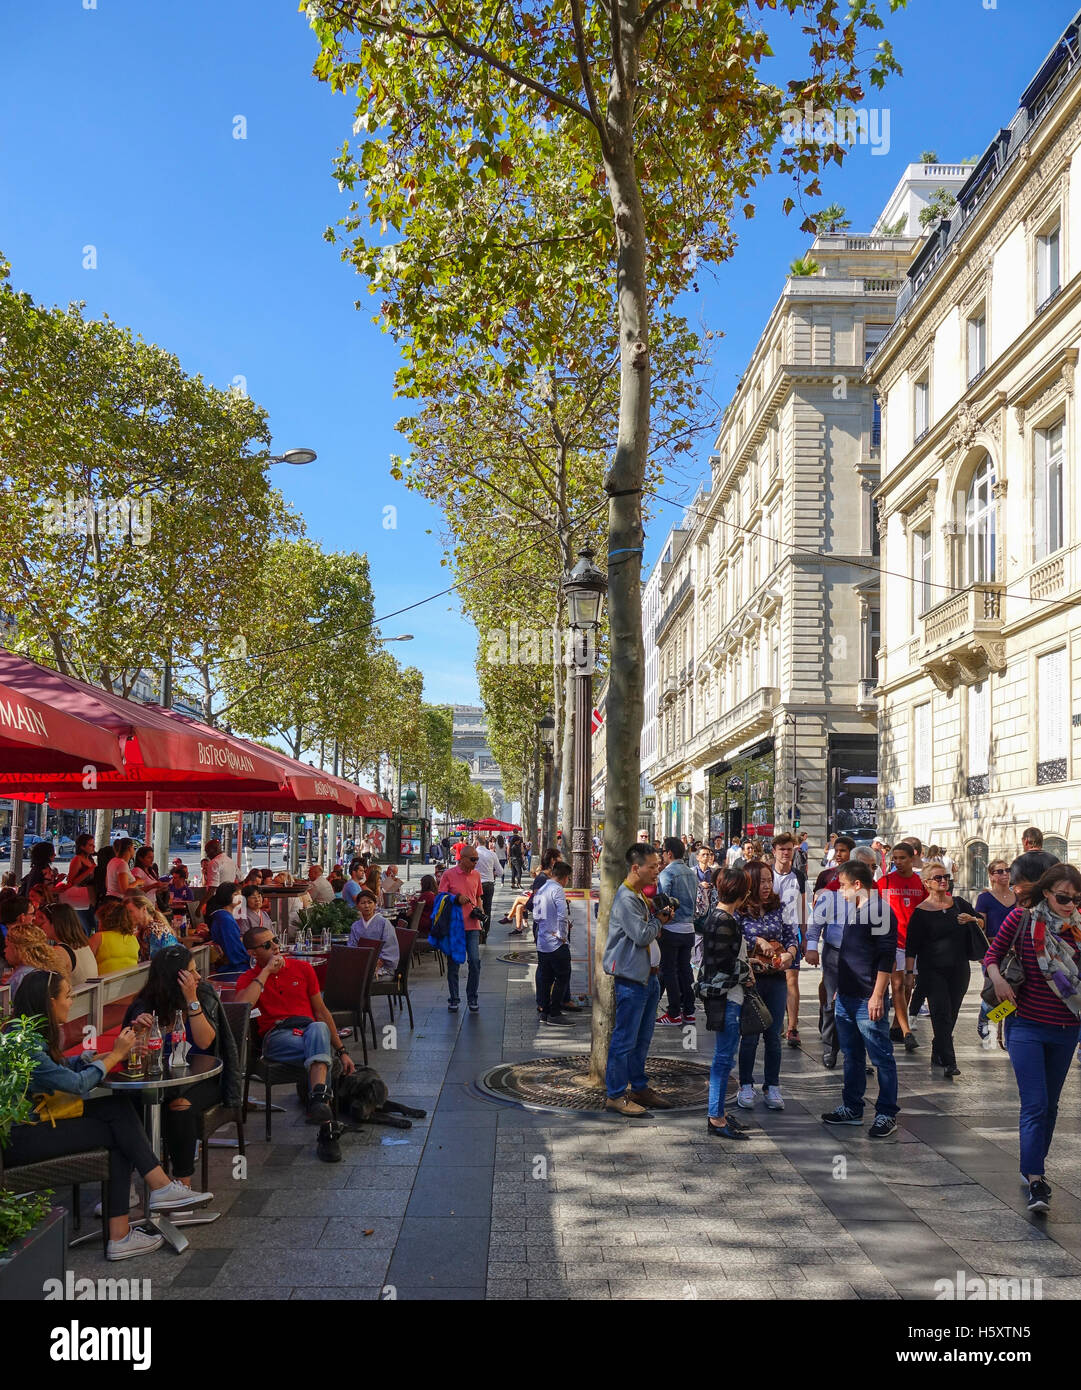 Street View Of Champselysees Avenue With Building Louis Vuitton In Paris  France Stock Photo - Download Image Now - iStock